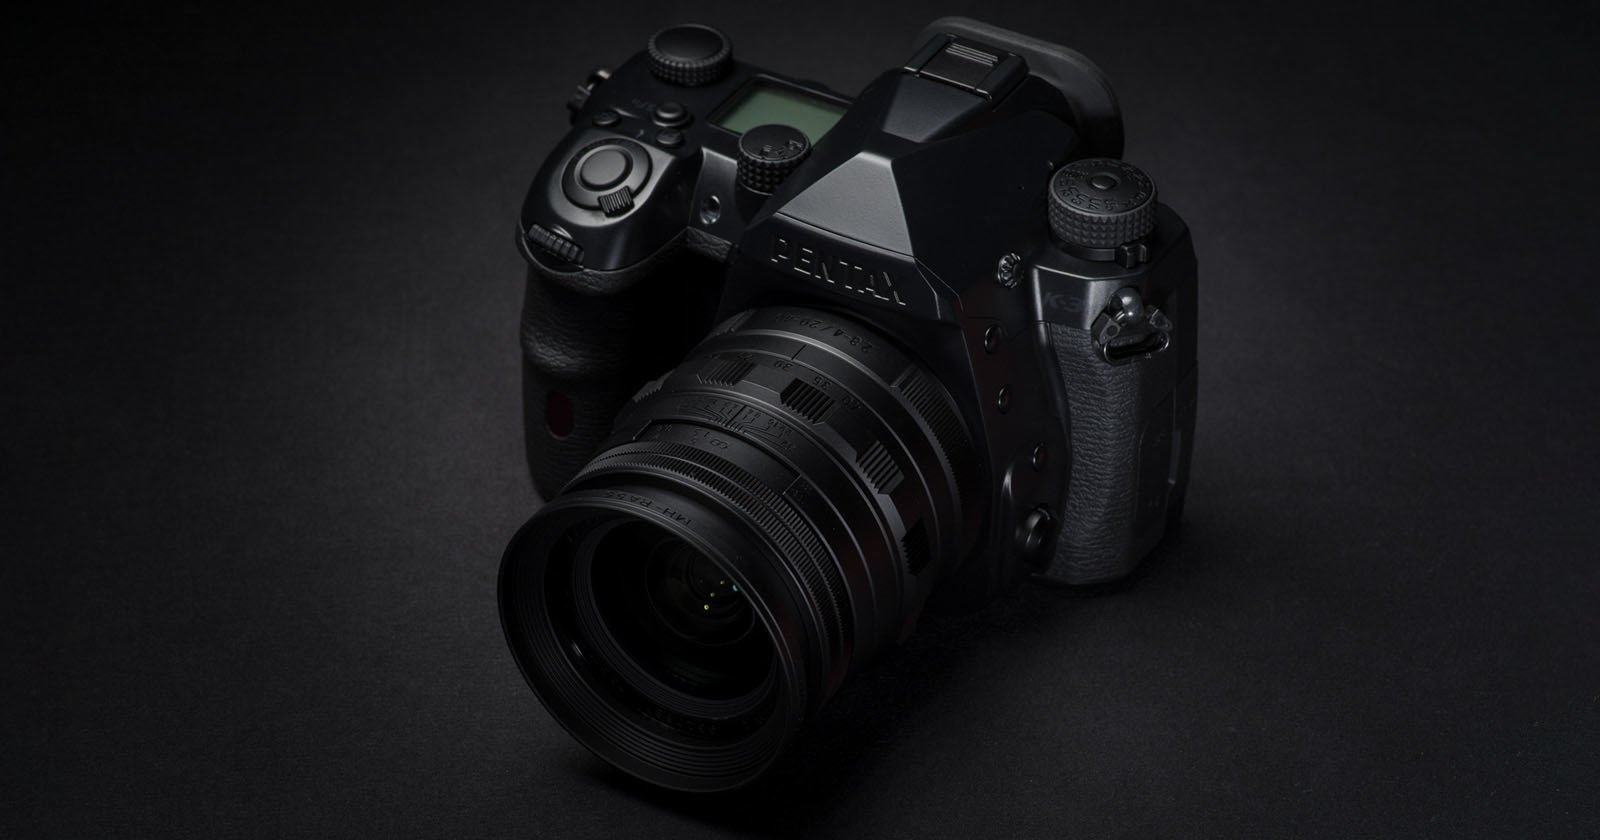 The Pentax K-3 III Jet Black Special Edition is Now Available in the U.S.